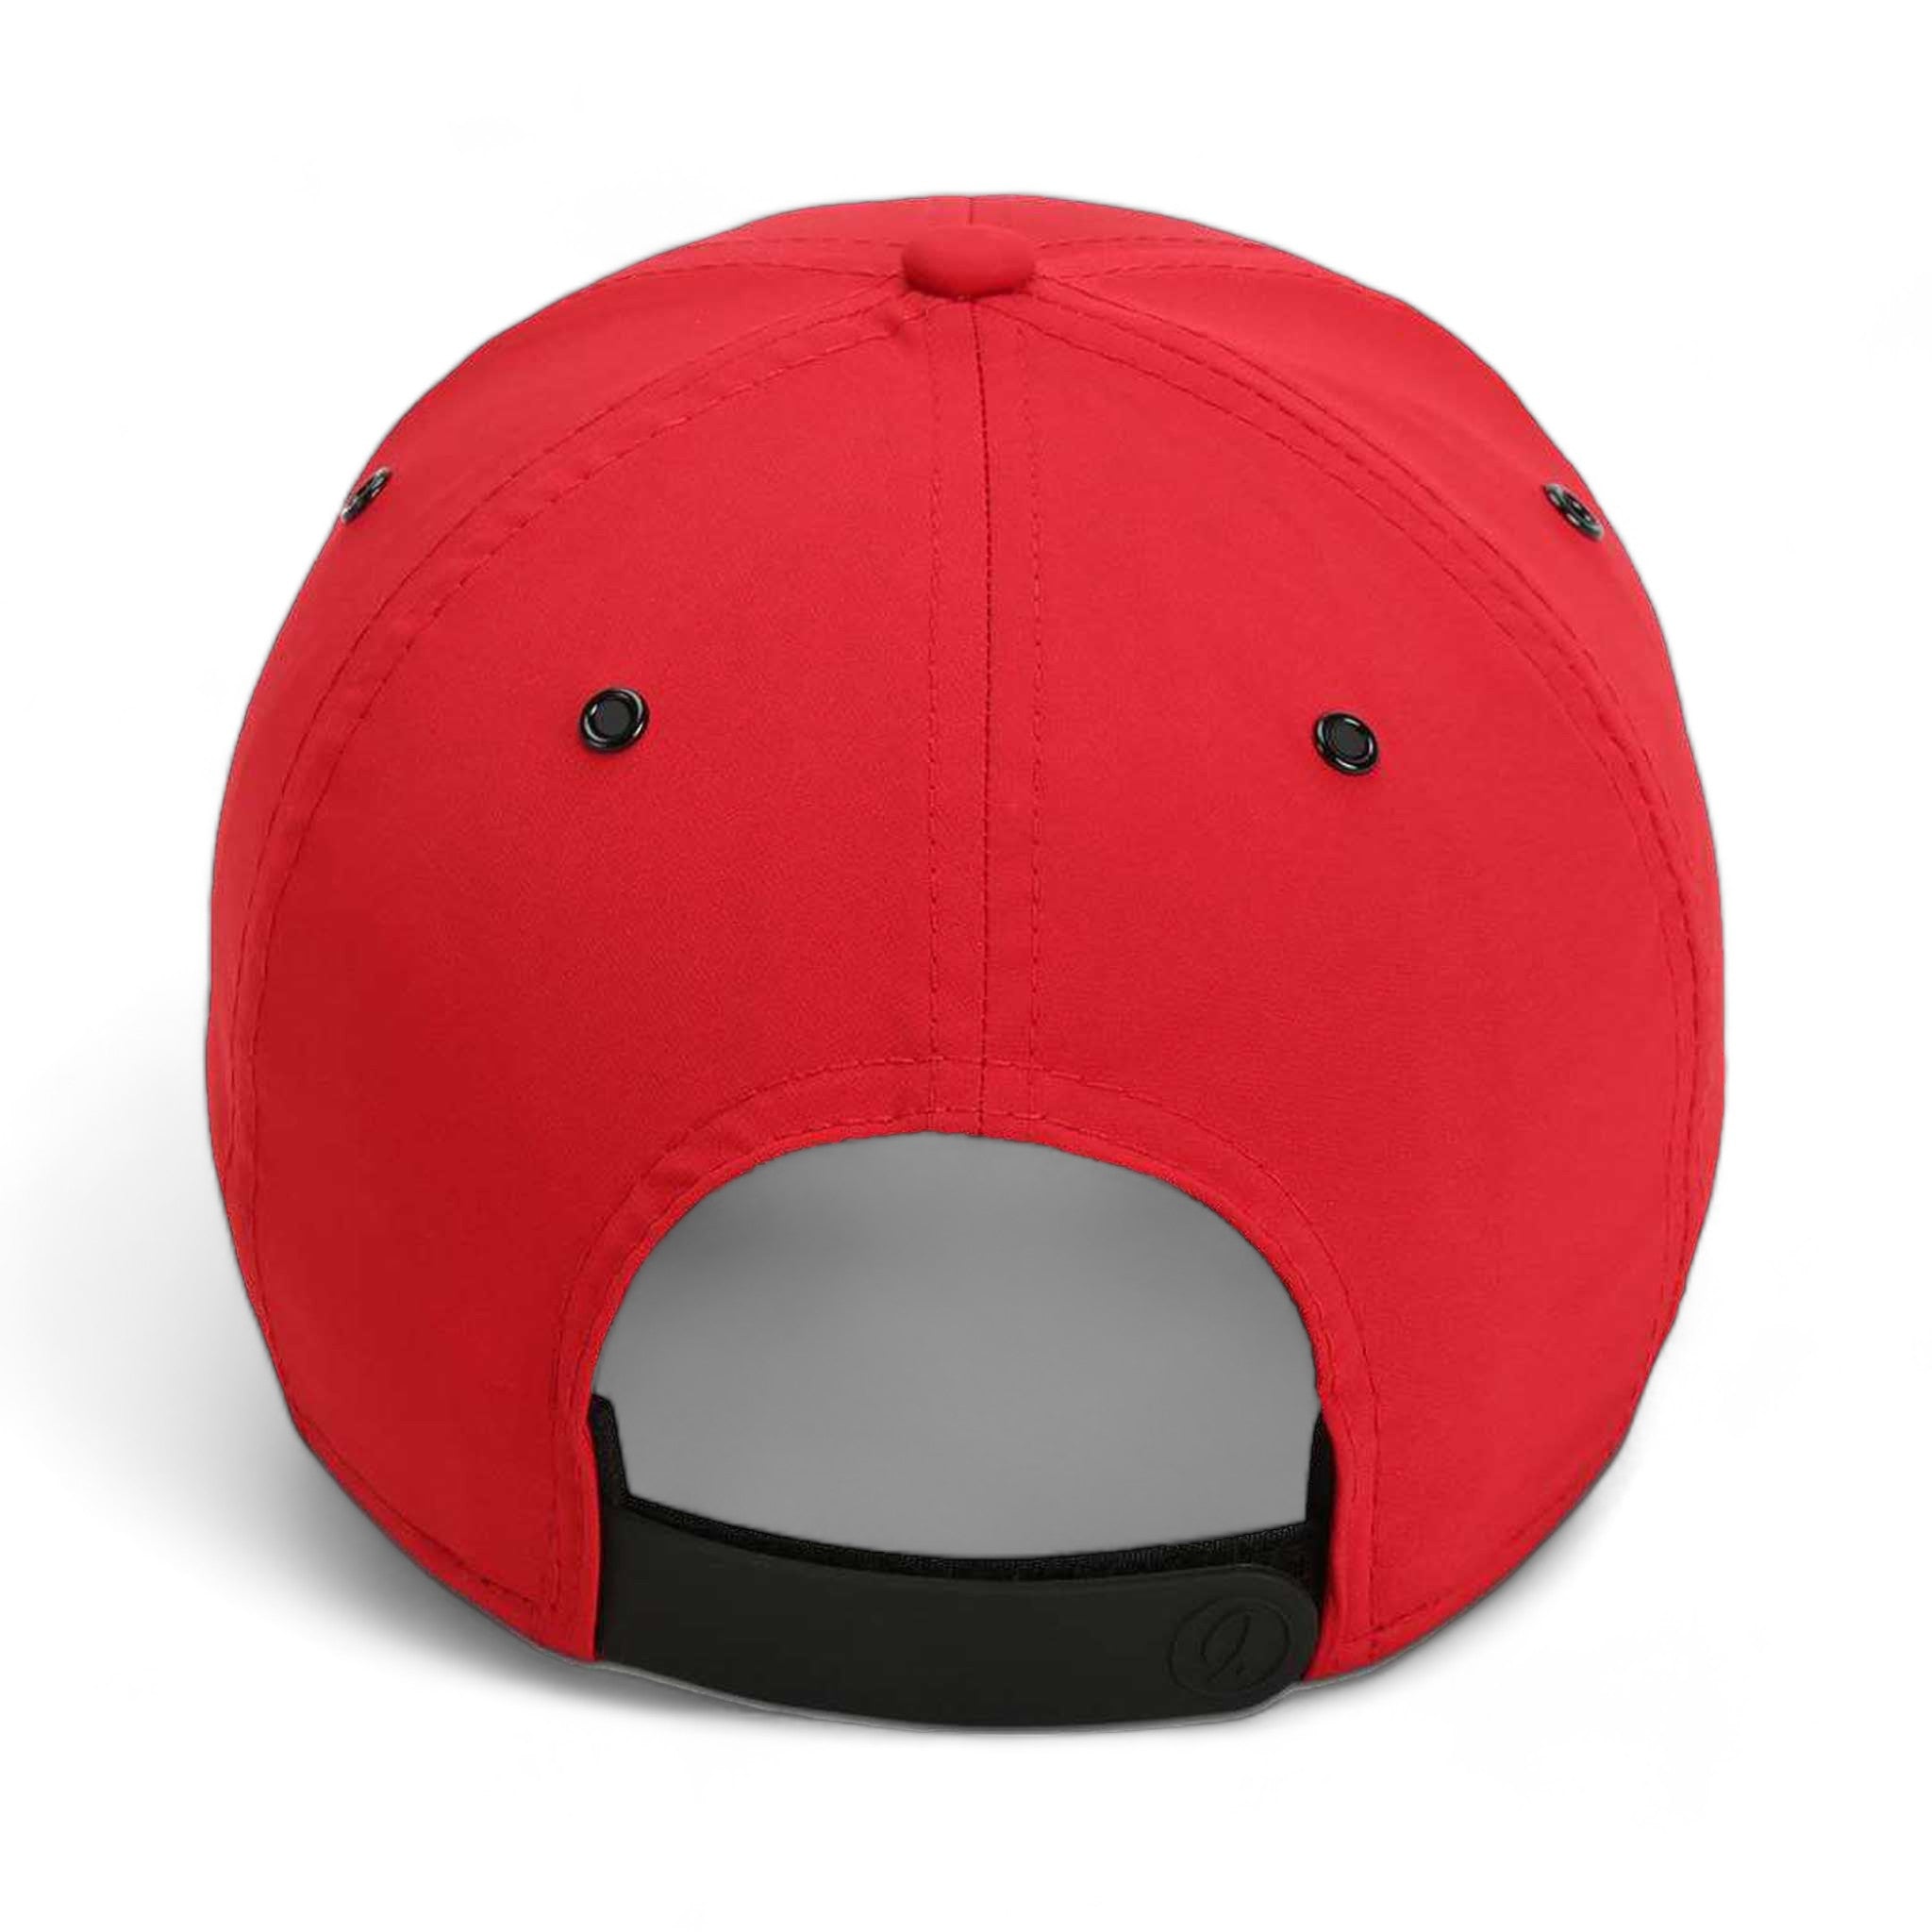 Back view of Imperial 6054 custom hat in red